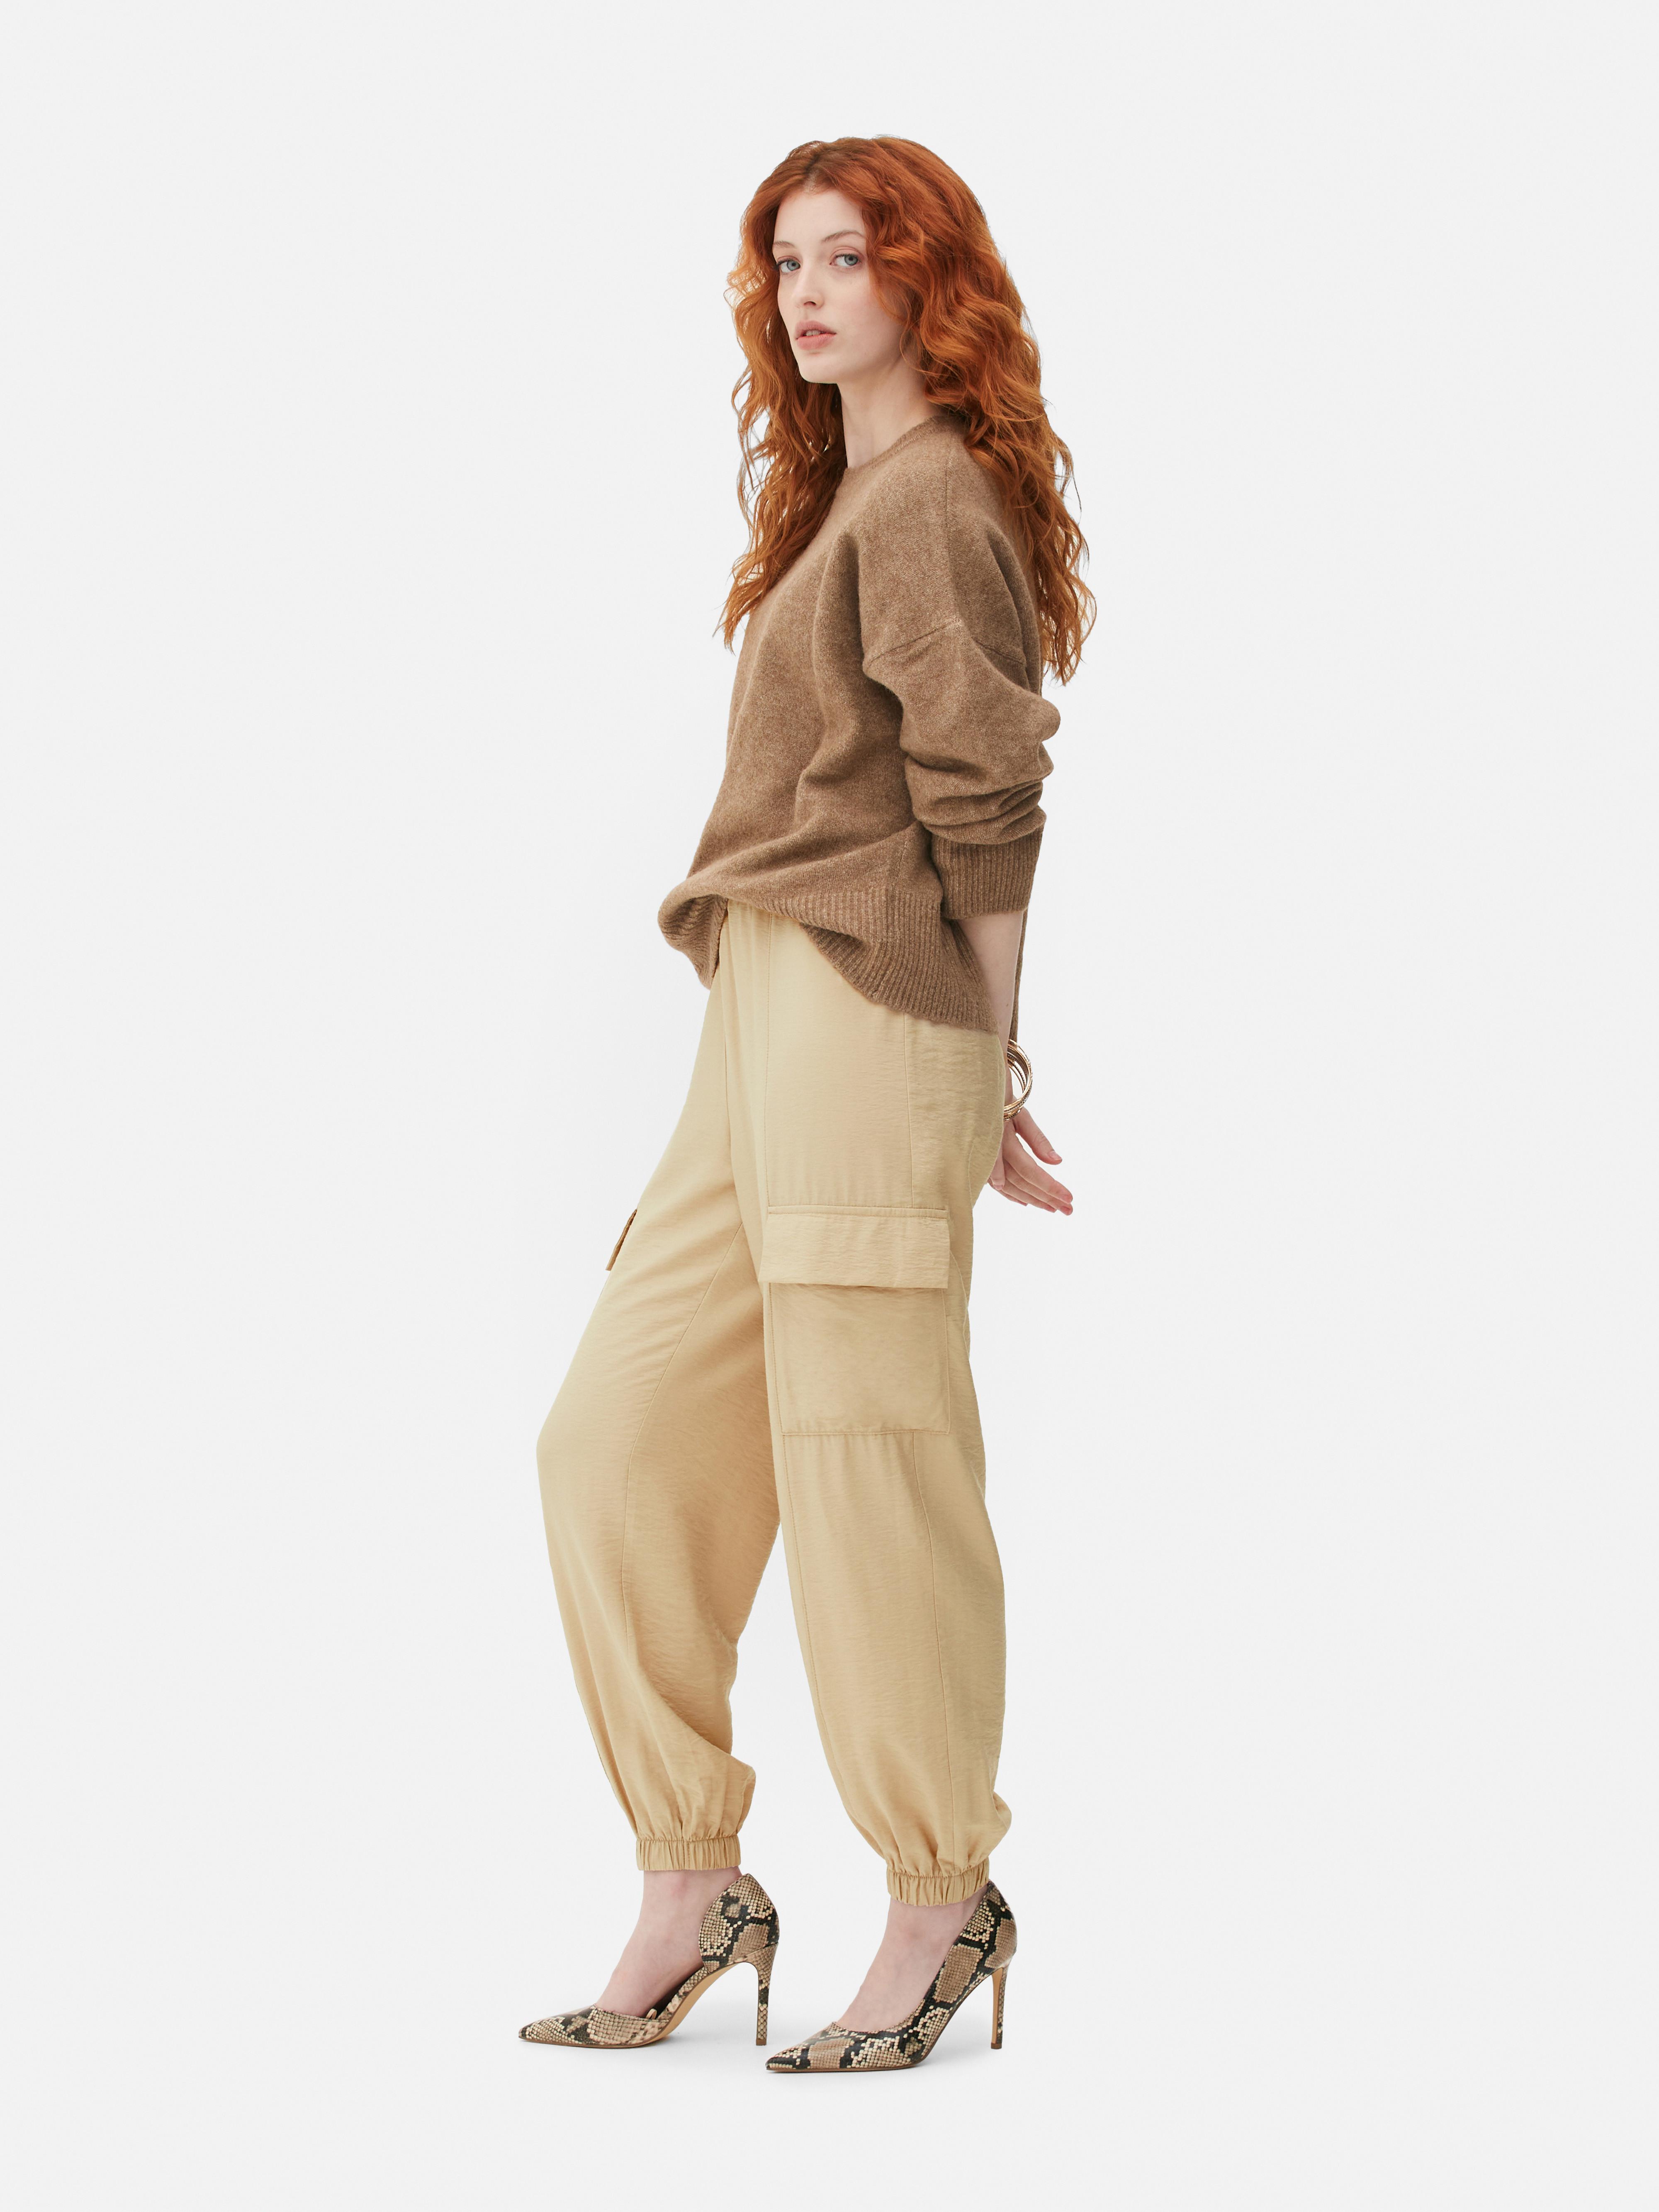 Loose Cargo Pants For Women Elastic Waist, Ankle Length, Streetwear,  Jogging, Sport Ladies Cargo Trousers Primark Plus Szie Casual Pant 211006  From Kong01, $18.99